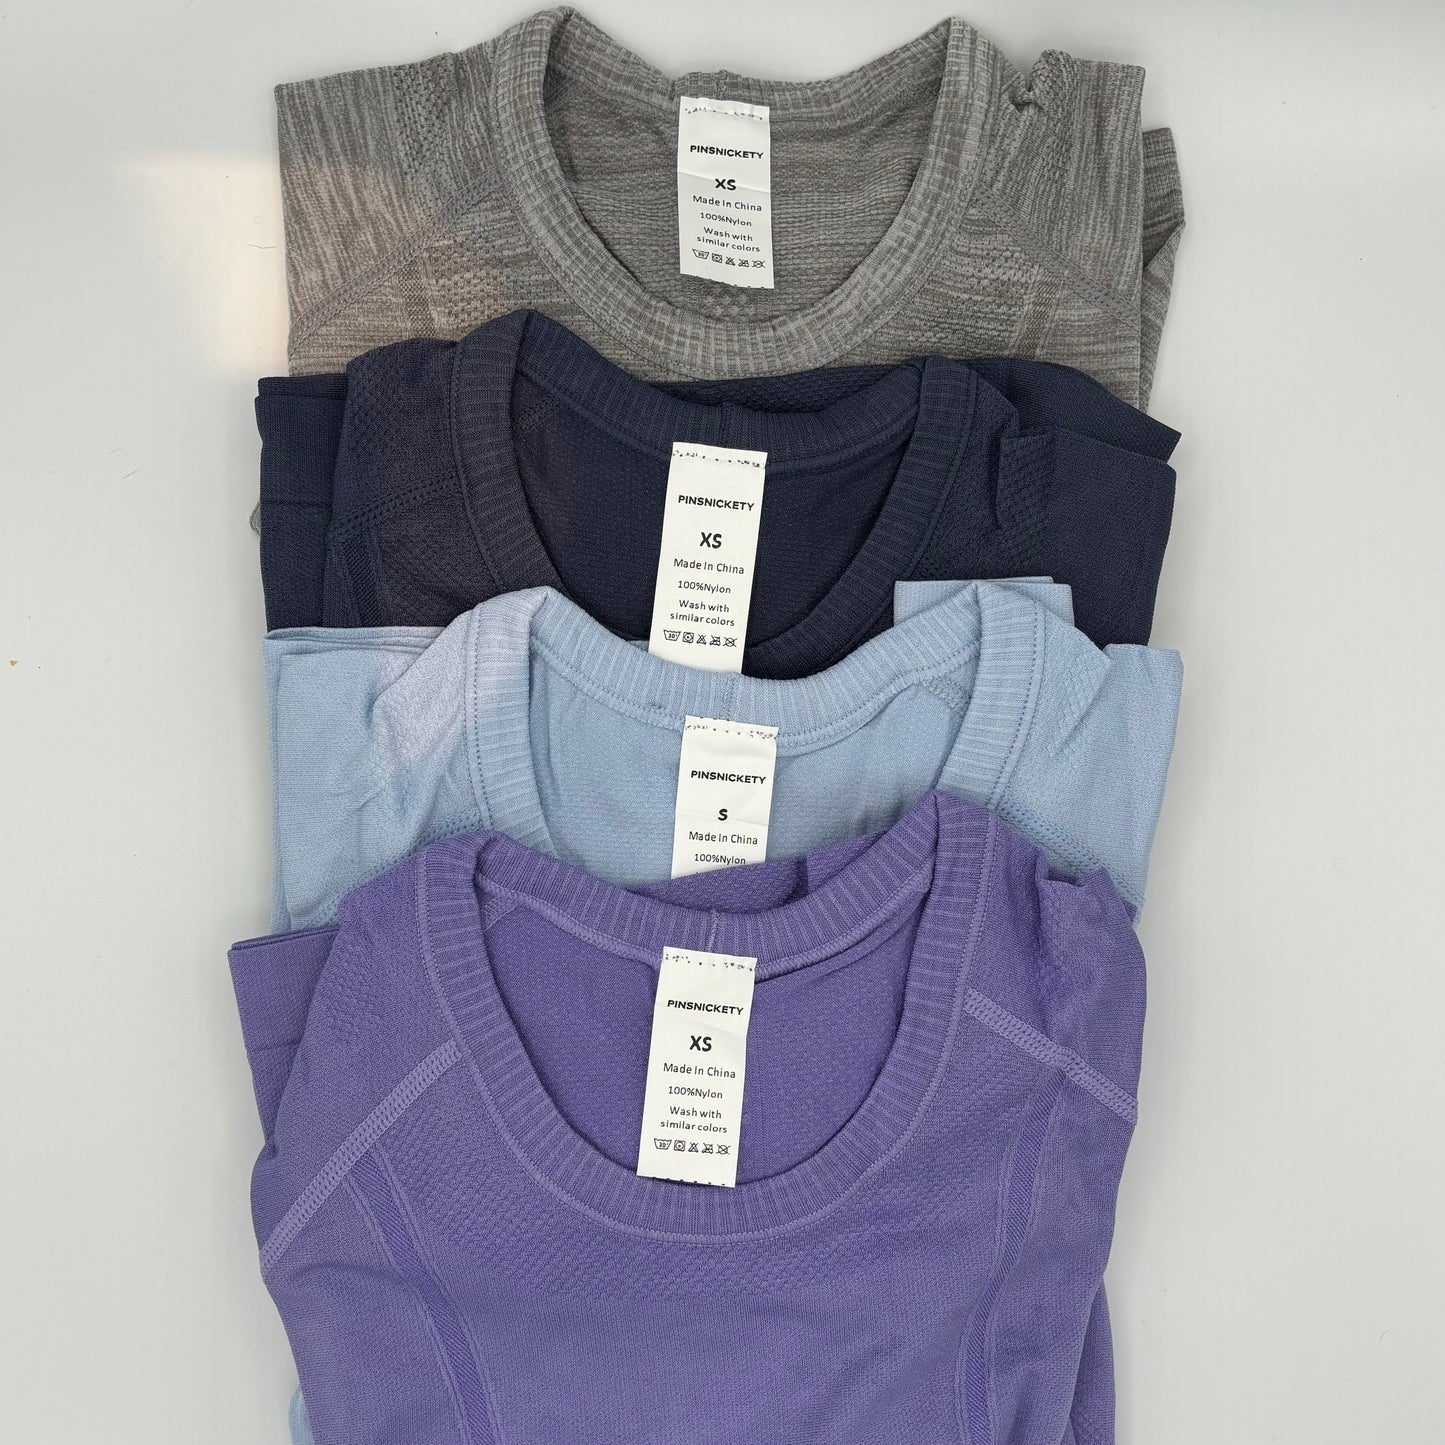 pinsnickety seamless tech top showing all four color options